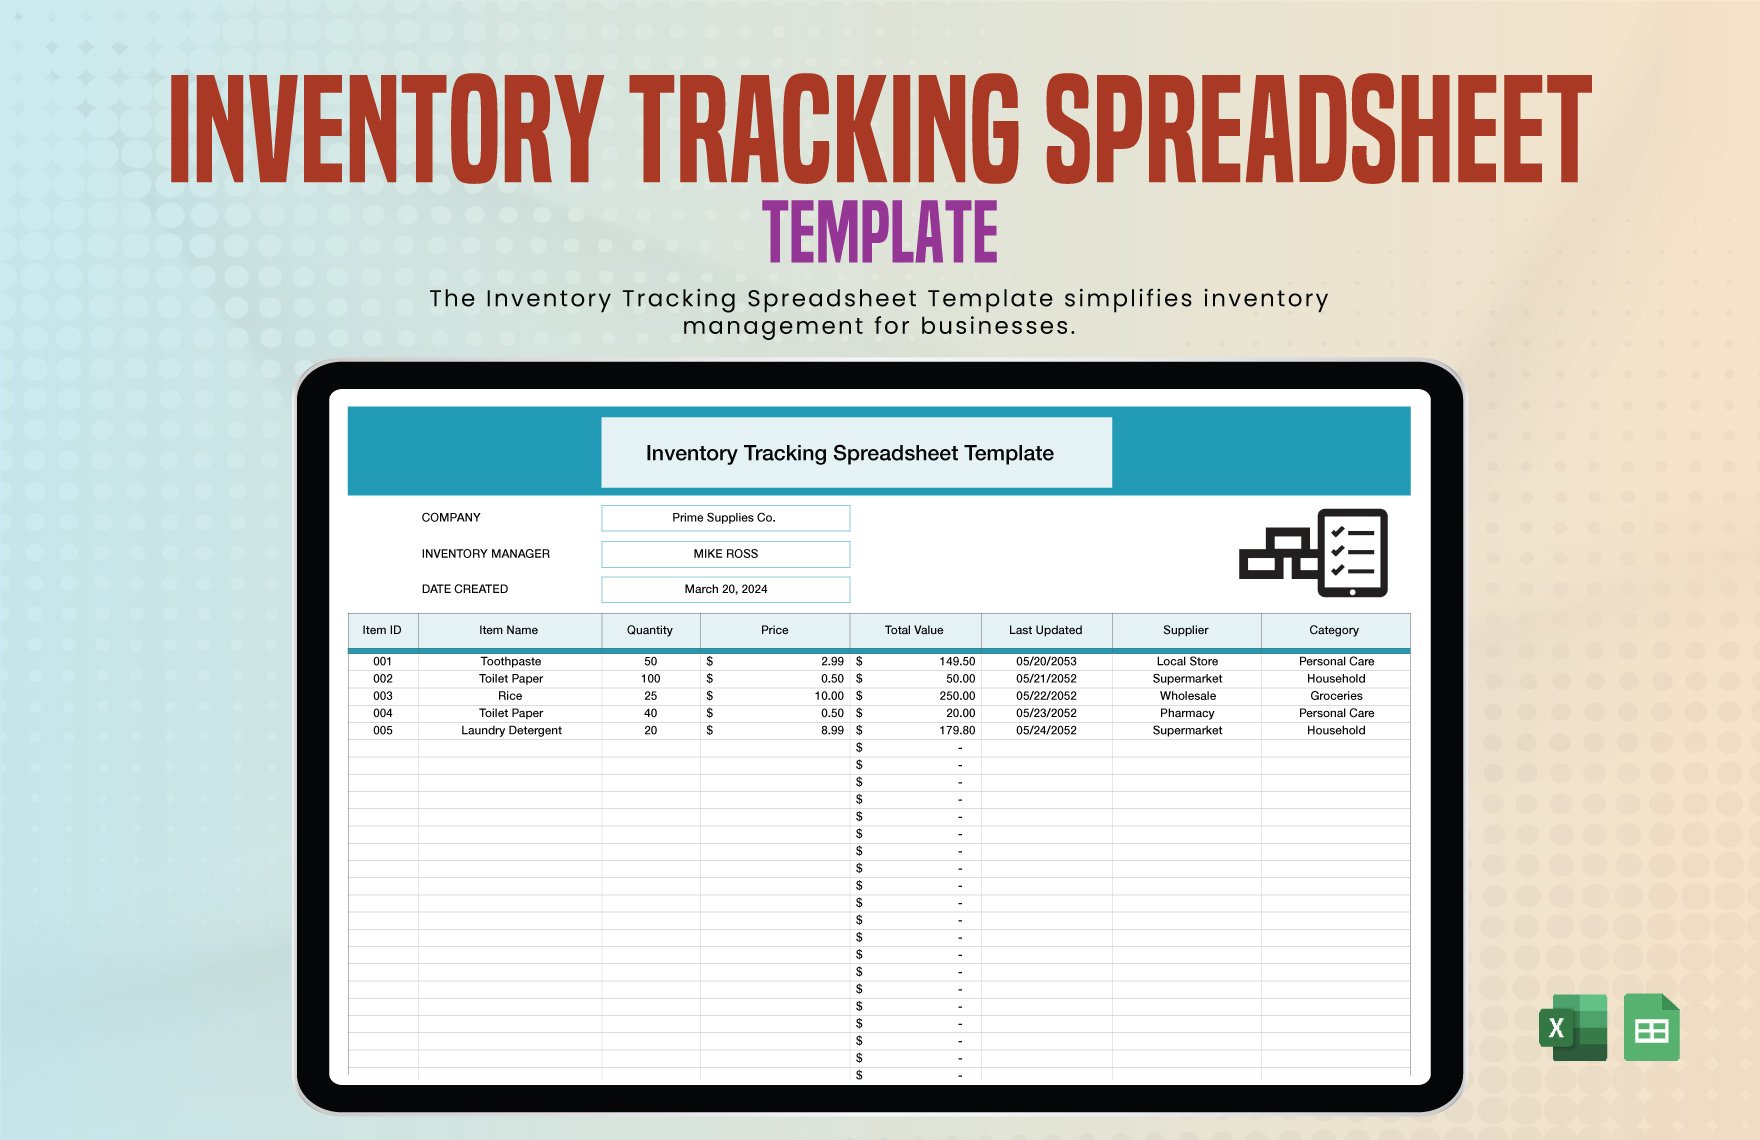 Inventory Tracking Spreadsheet Template in Excel, Google Sheets